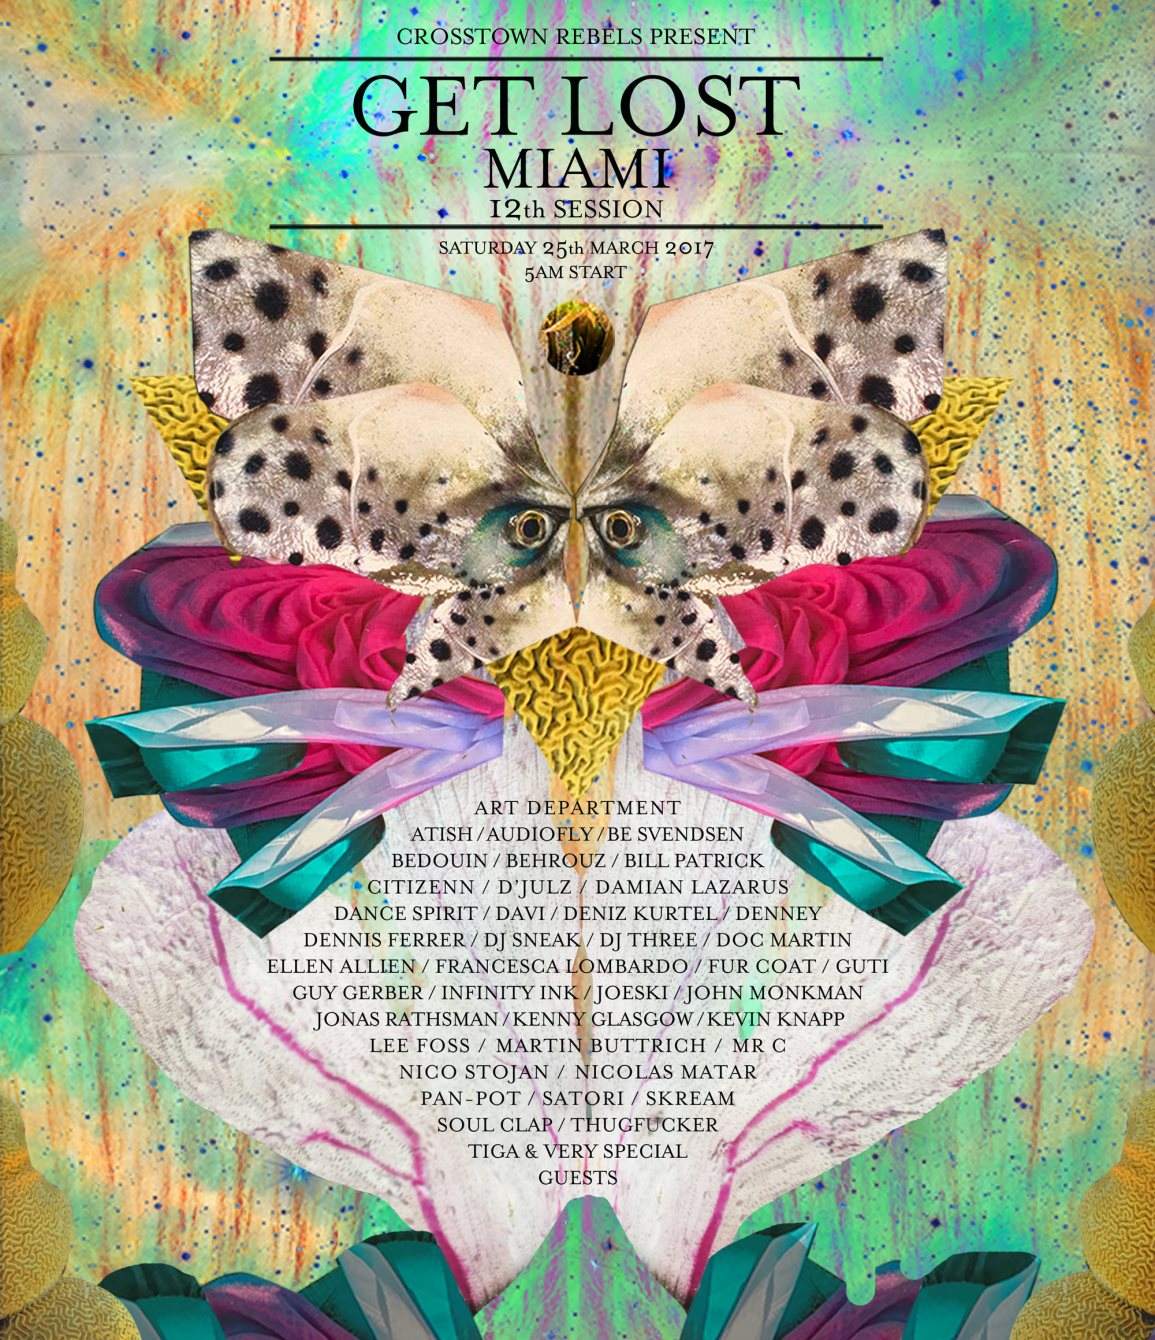 Crosstown Rebels present Get Lost Miami - 12th Session - Página frontal